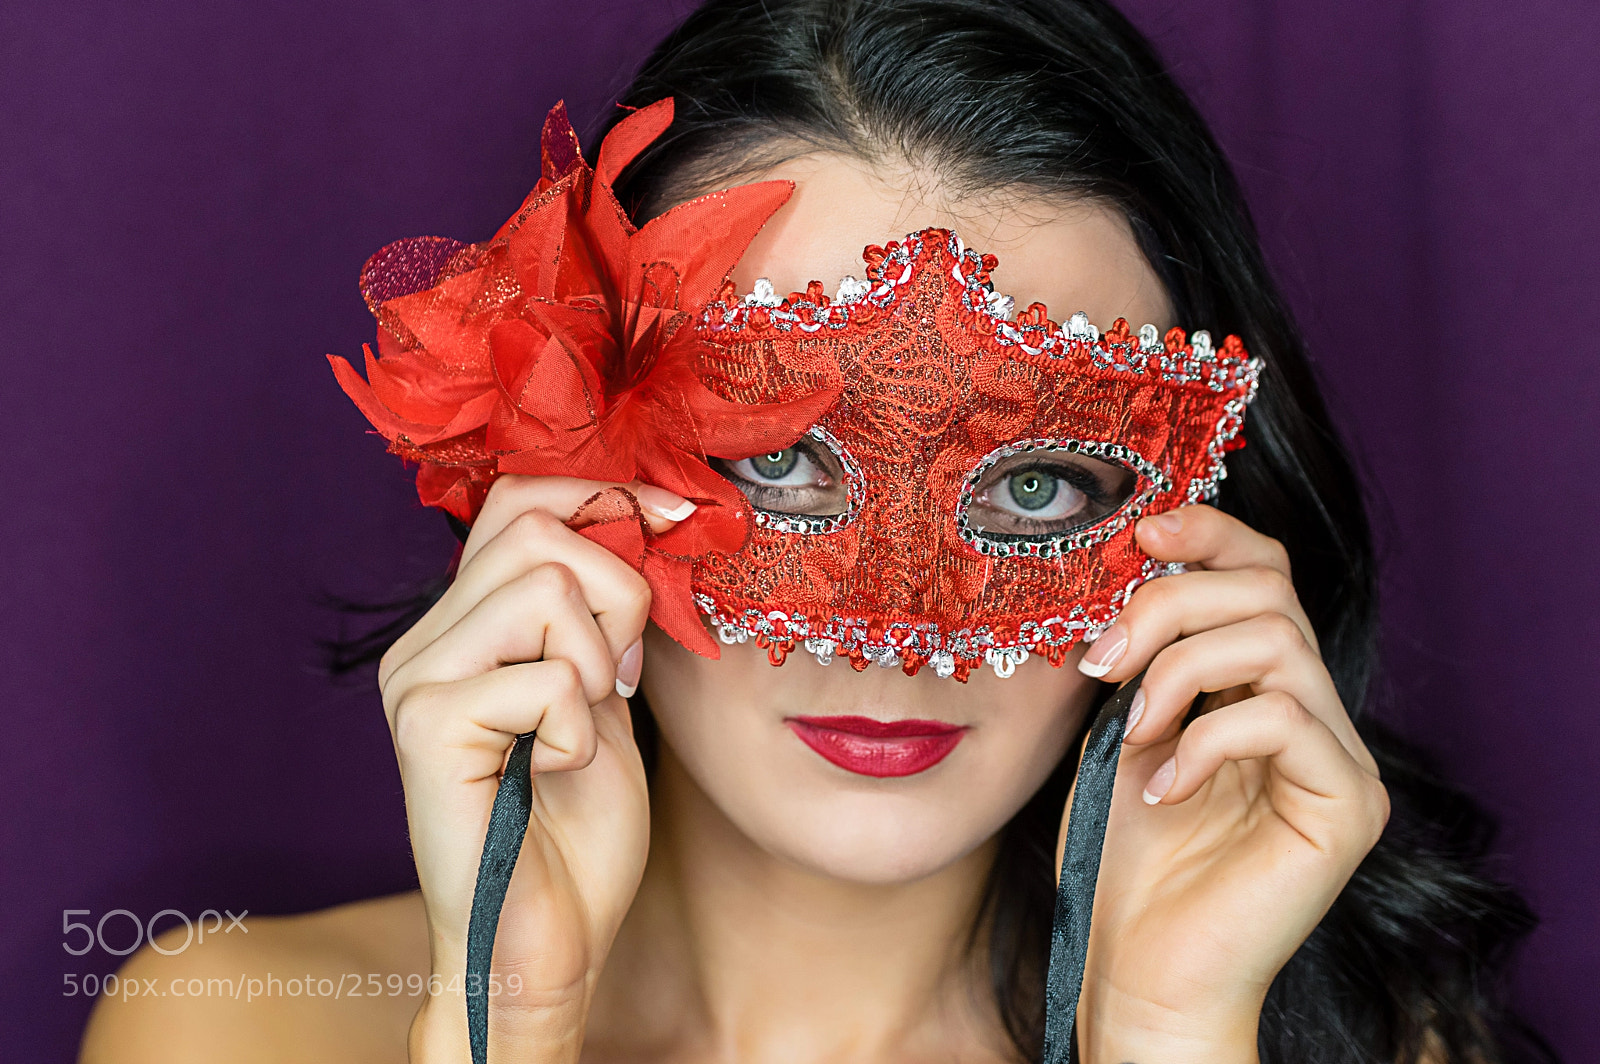 Pentax K-3 sample photo. Laurie bond plays masquerade photography